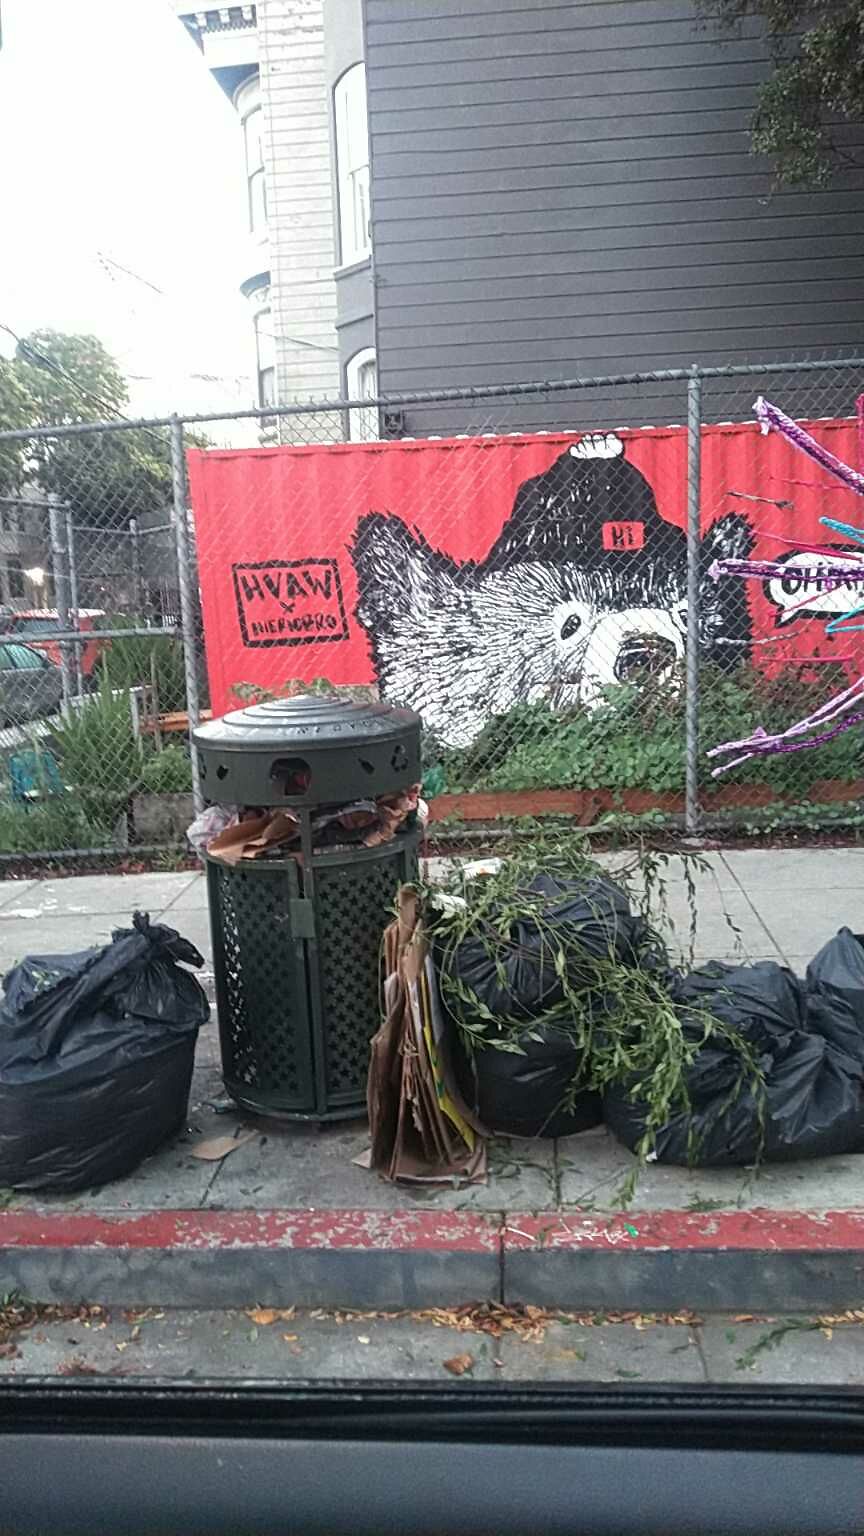 Black garbage bags with plants spilling out of them sit next to a trash can.